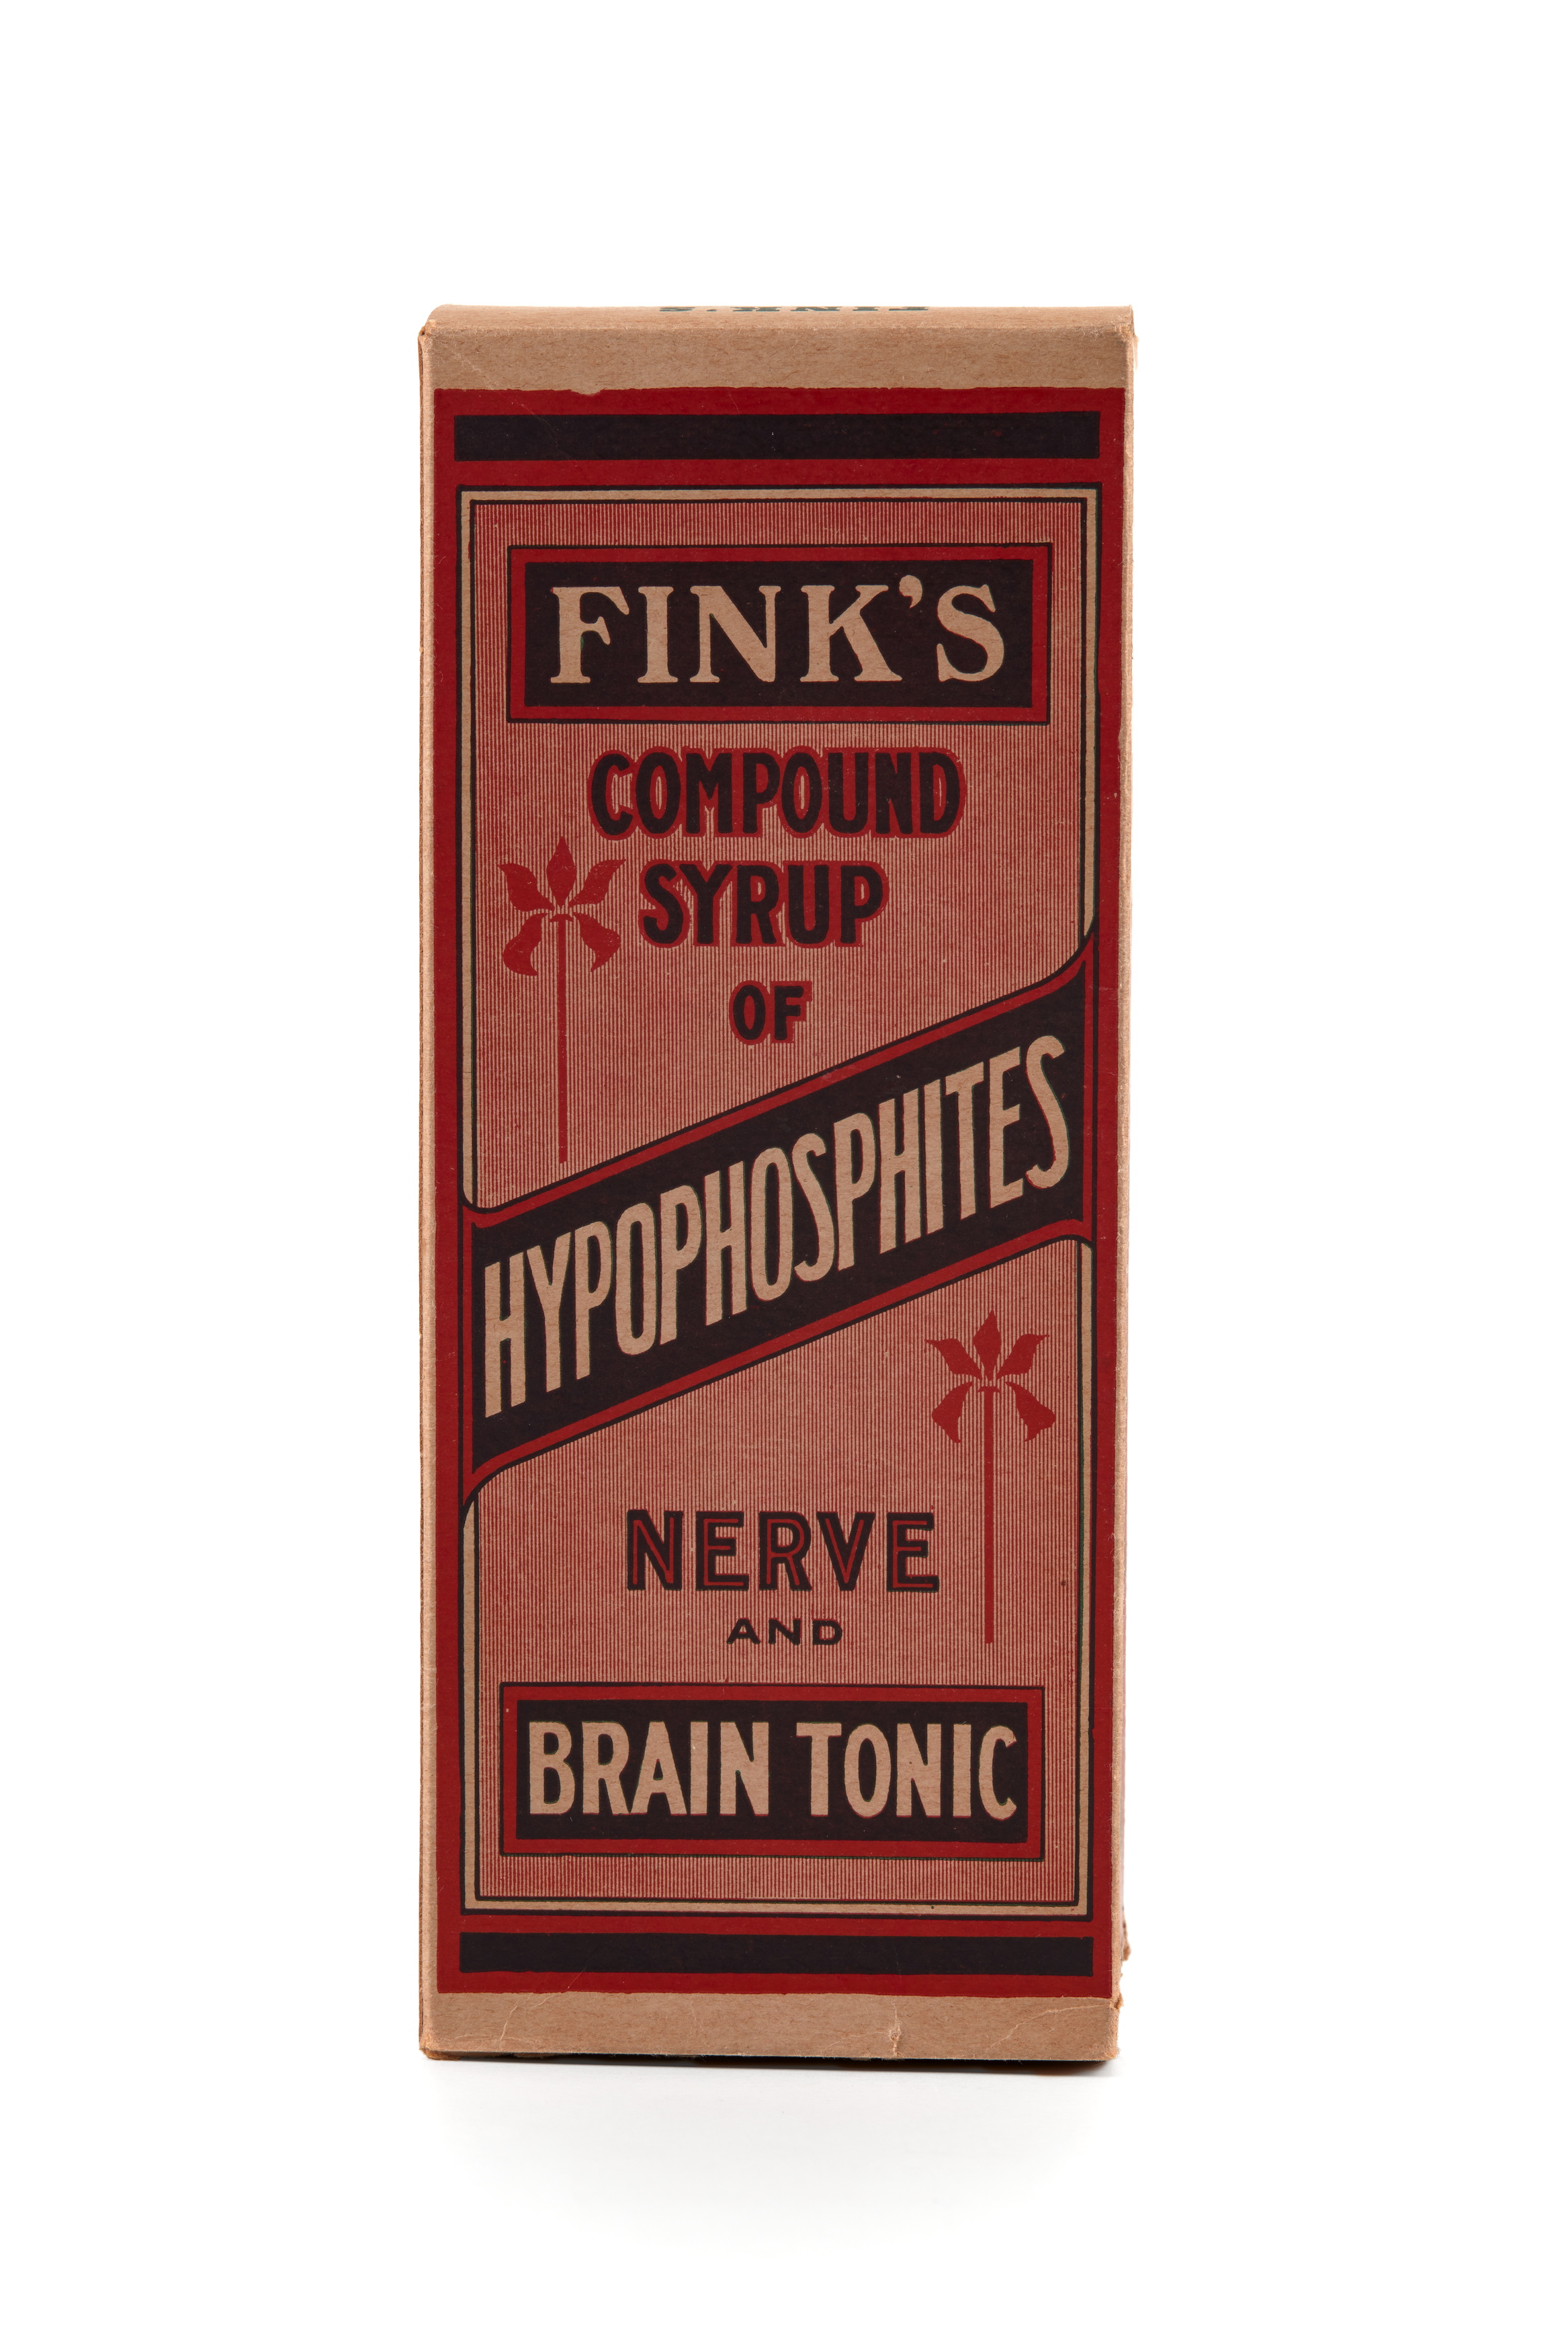 Packet of 'Fink's Compound Syrup'